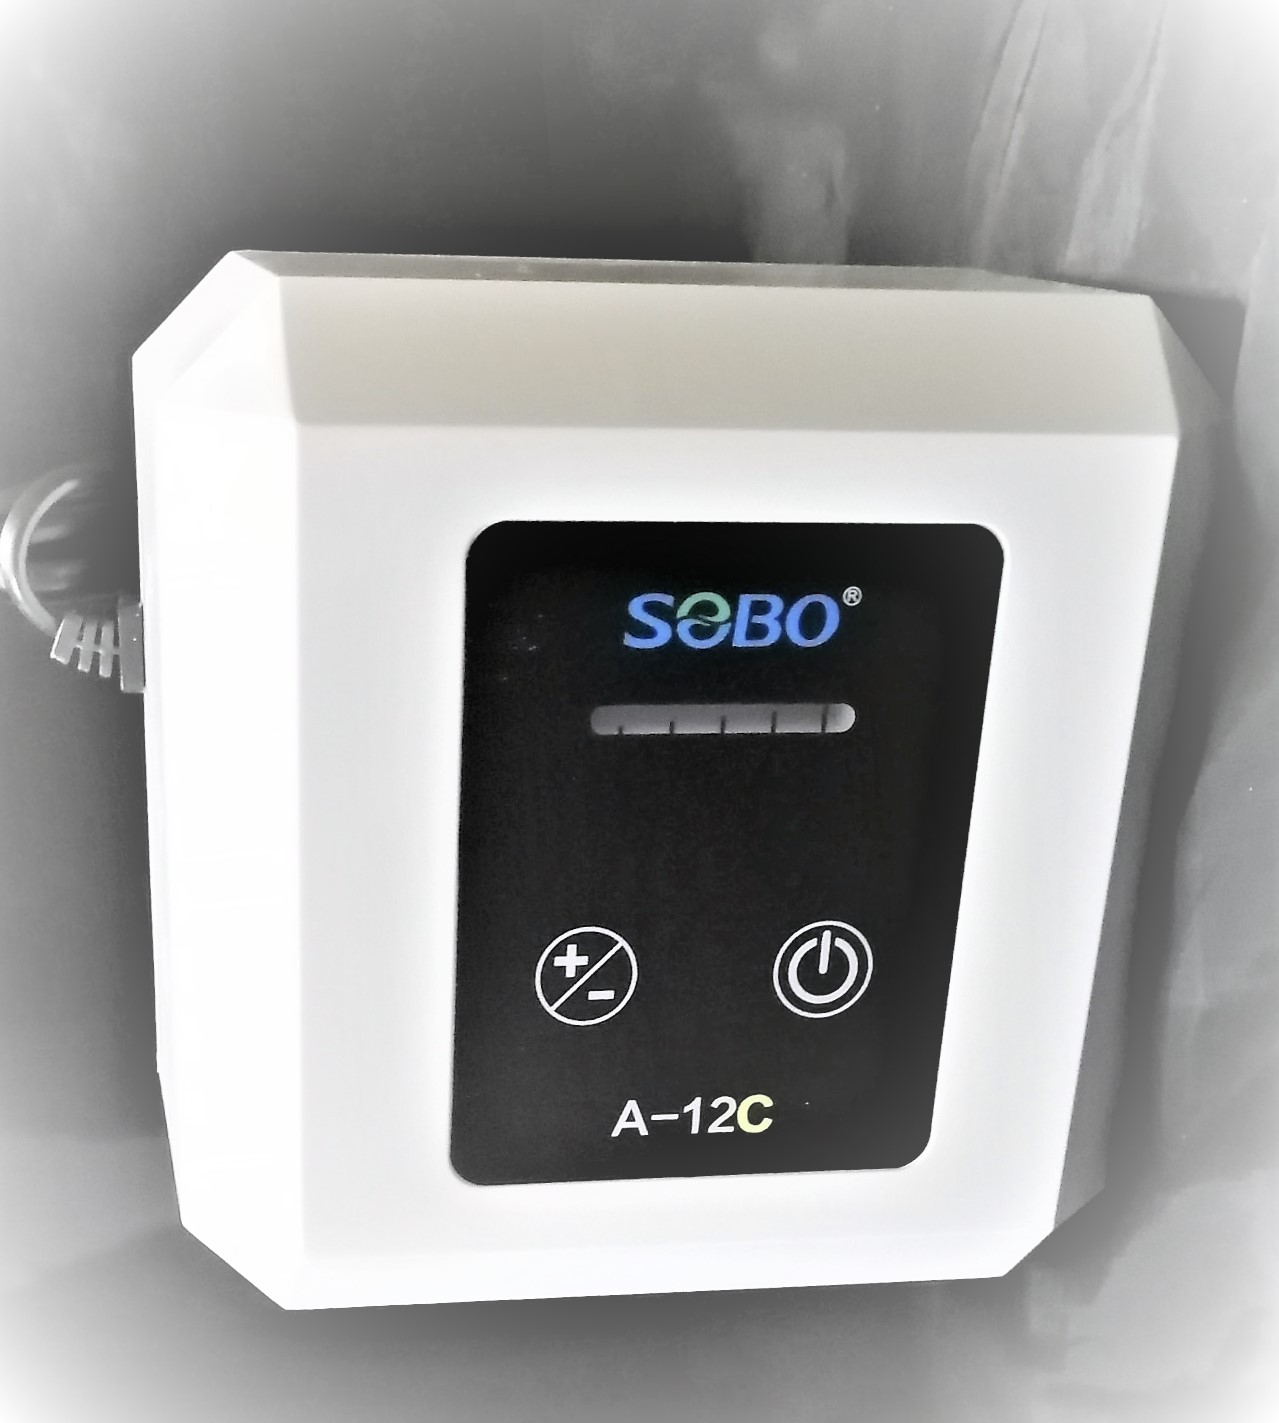 SOBO SB-1102/1106 with 3 silent housing